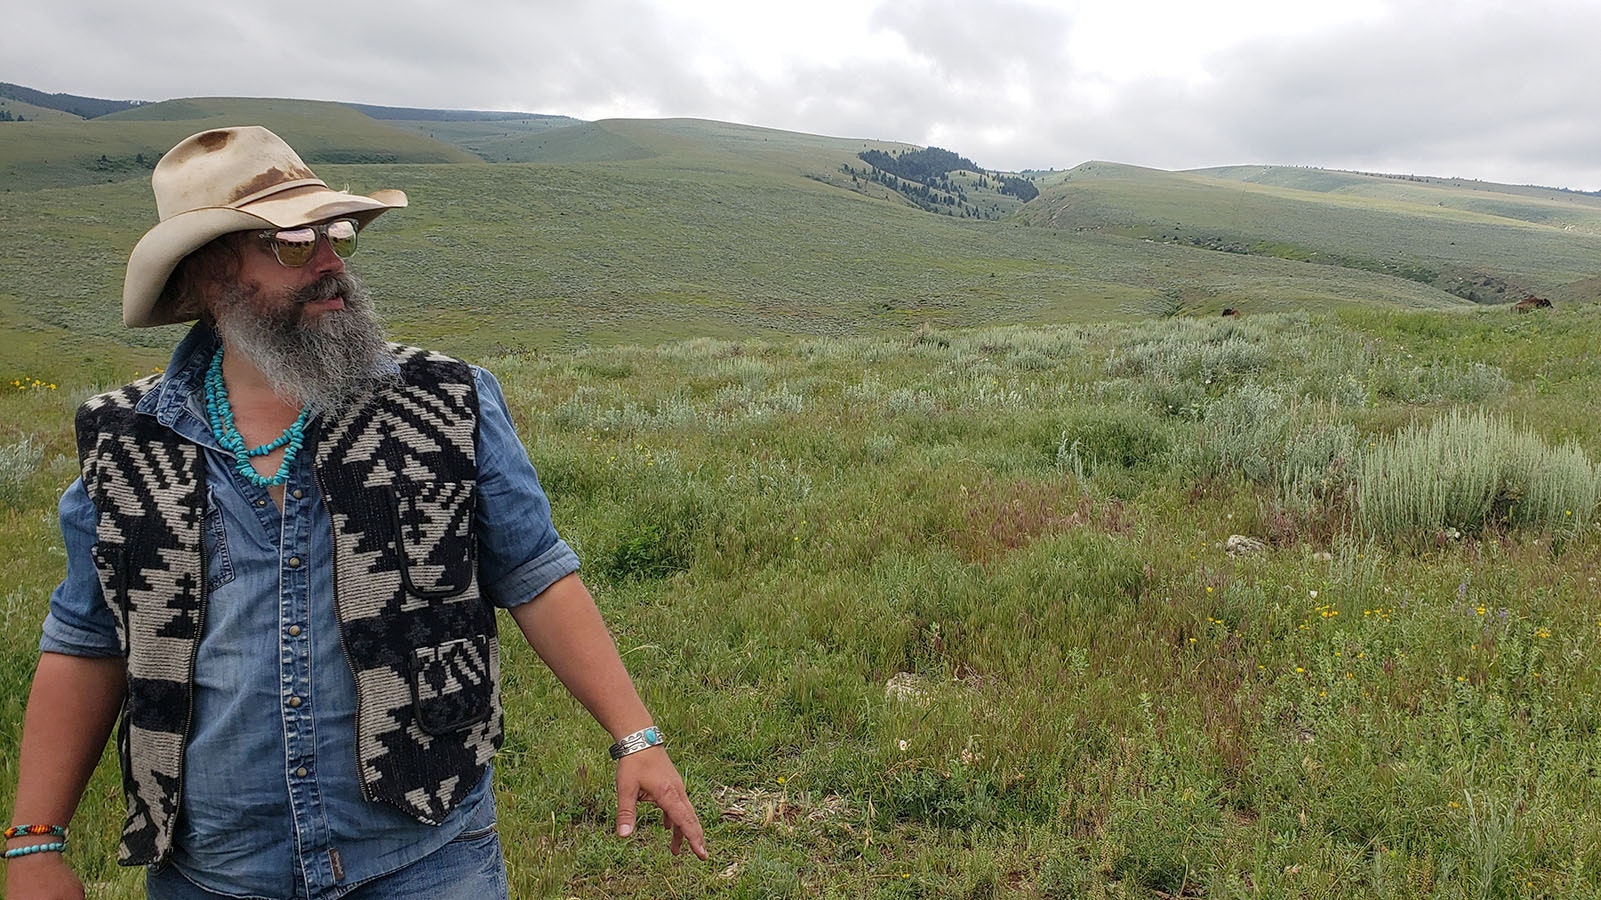 Josh Kirk on his ranch in Fremont County, Wyoming. He's being featured on History Channel's "Mountain Men" series.